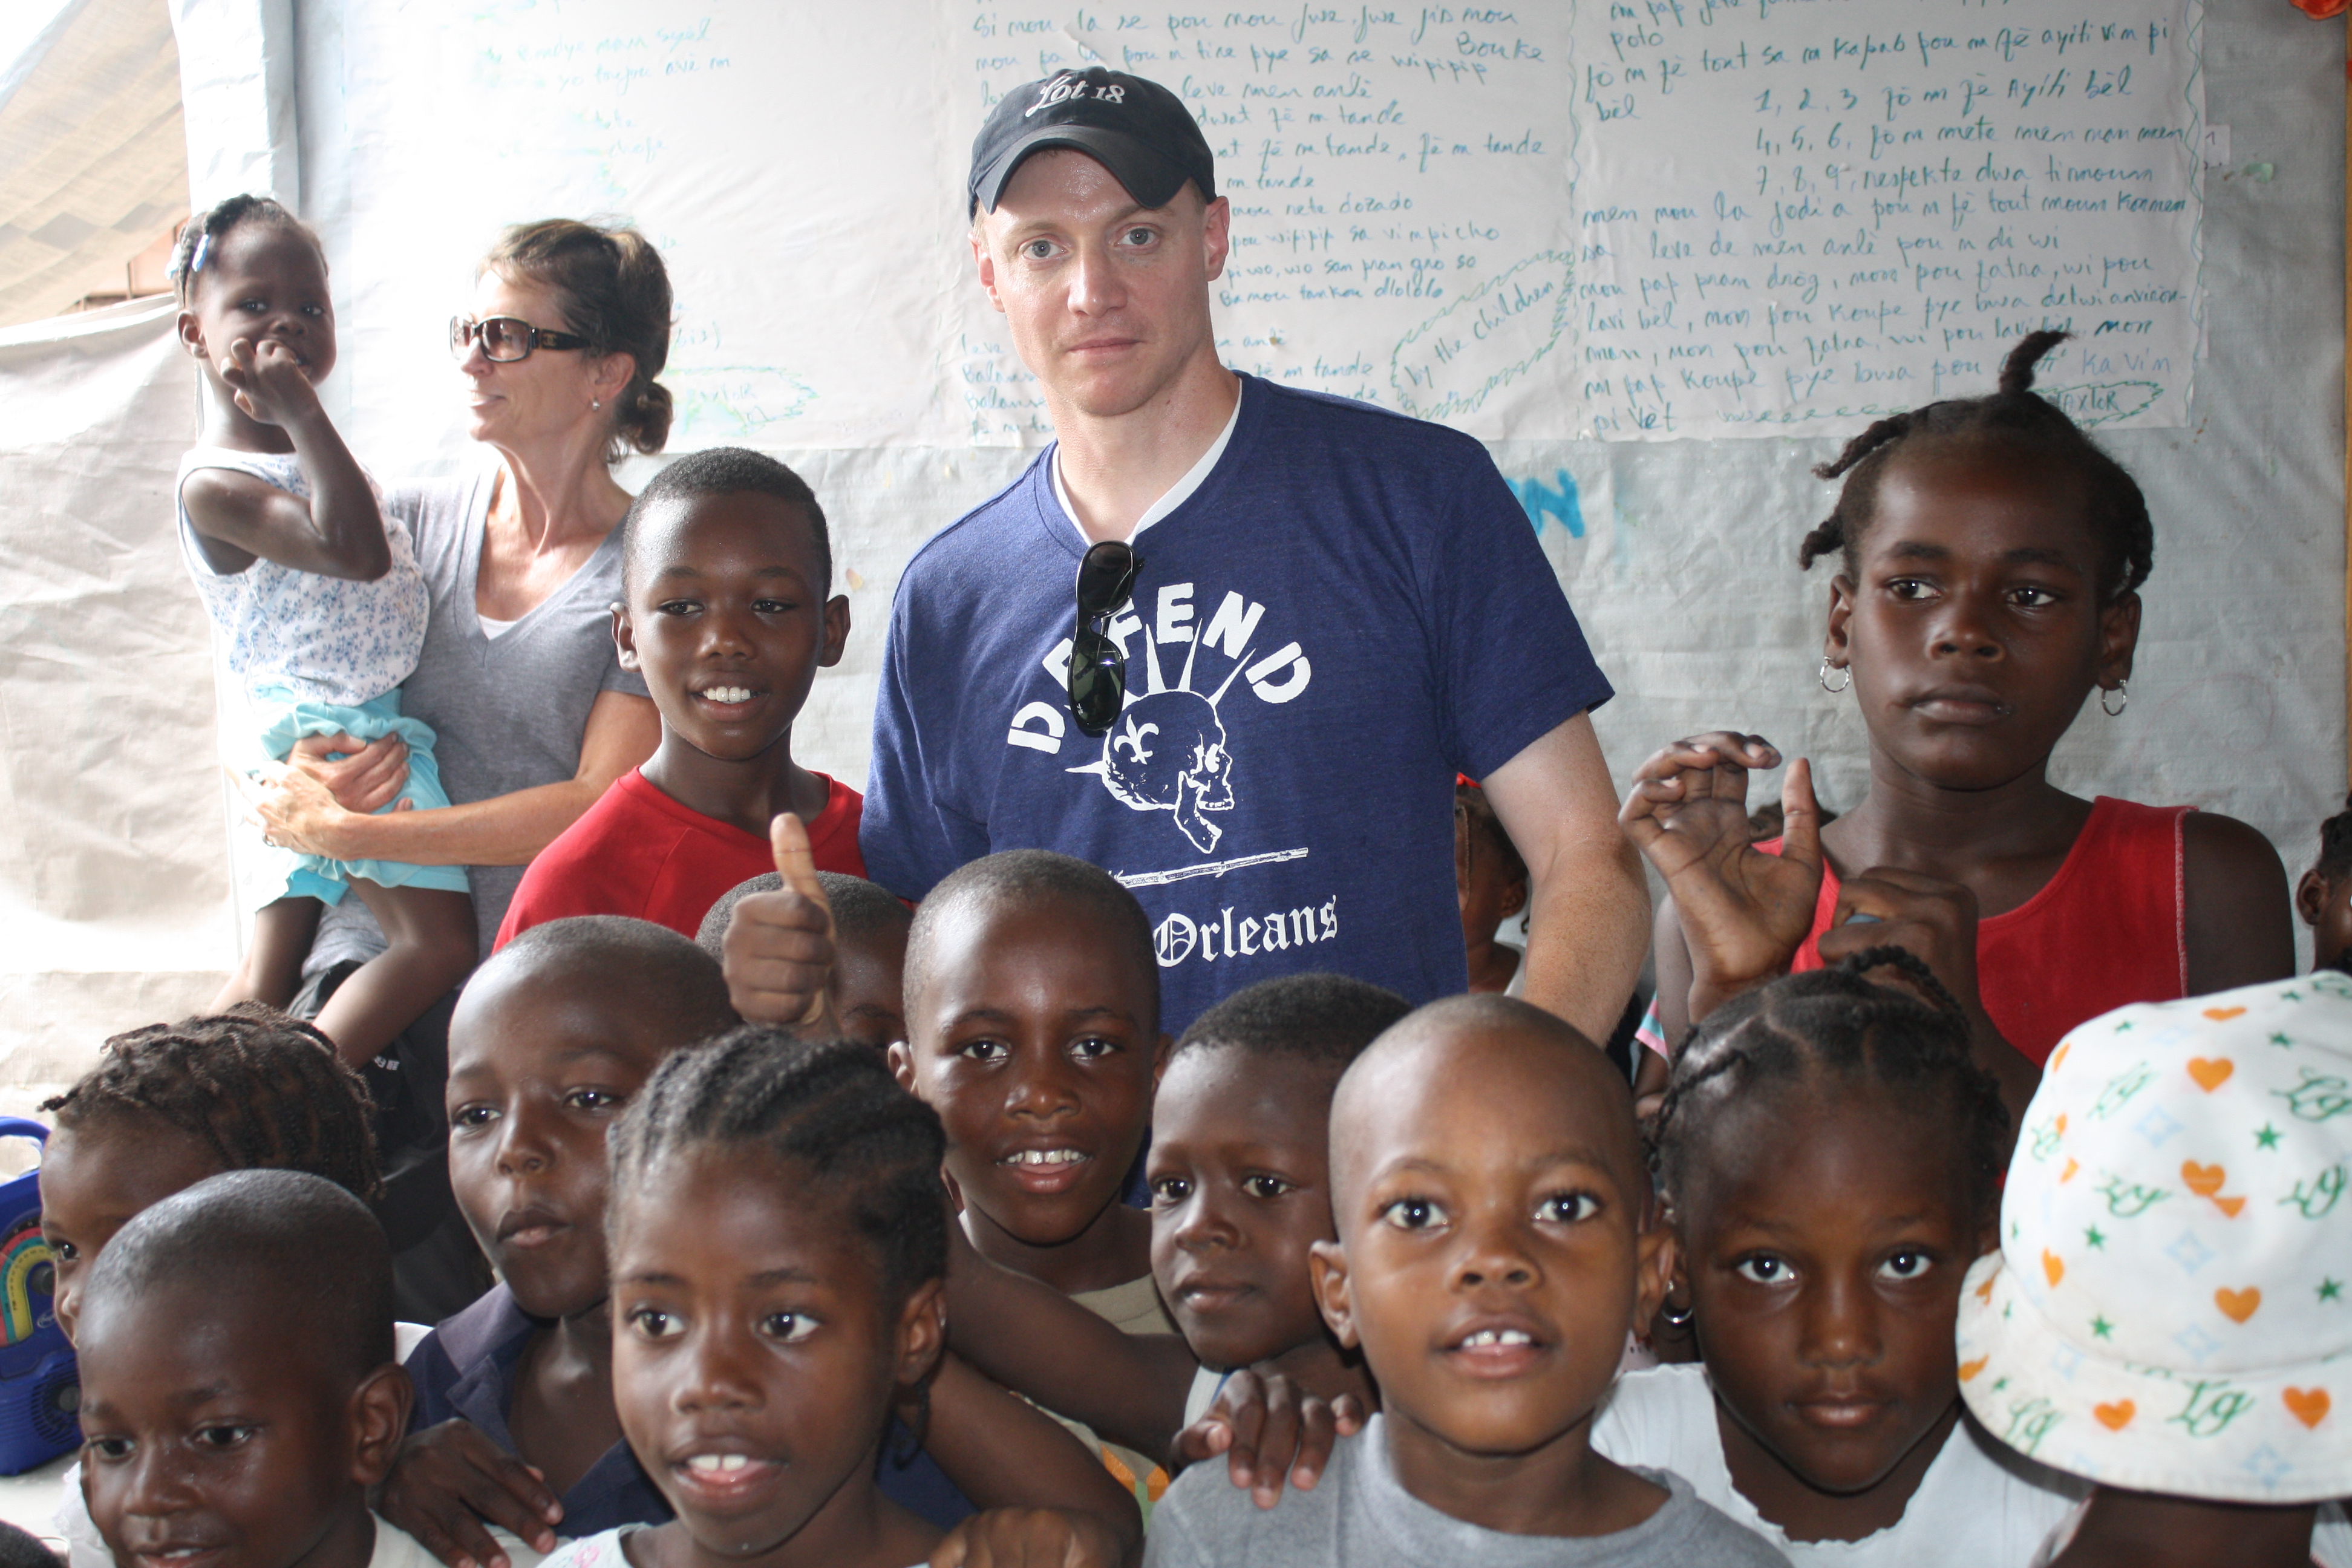 Fortuna, center in hat, visiting Concern's relief efforts in Haiti. (Courtesy Kevin Fortuna)